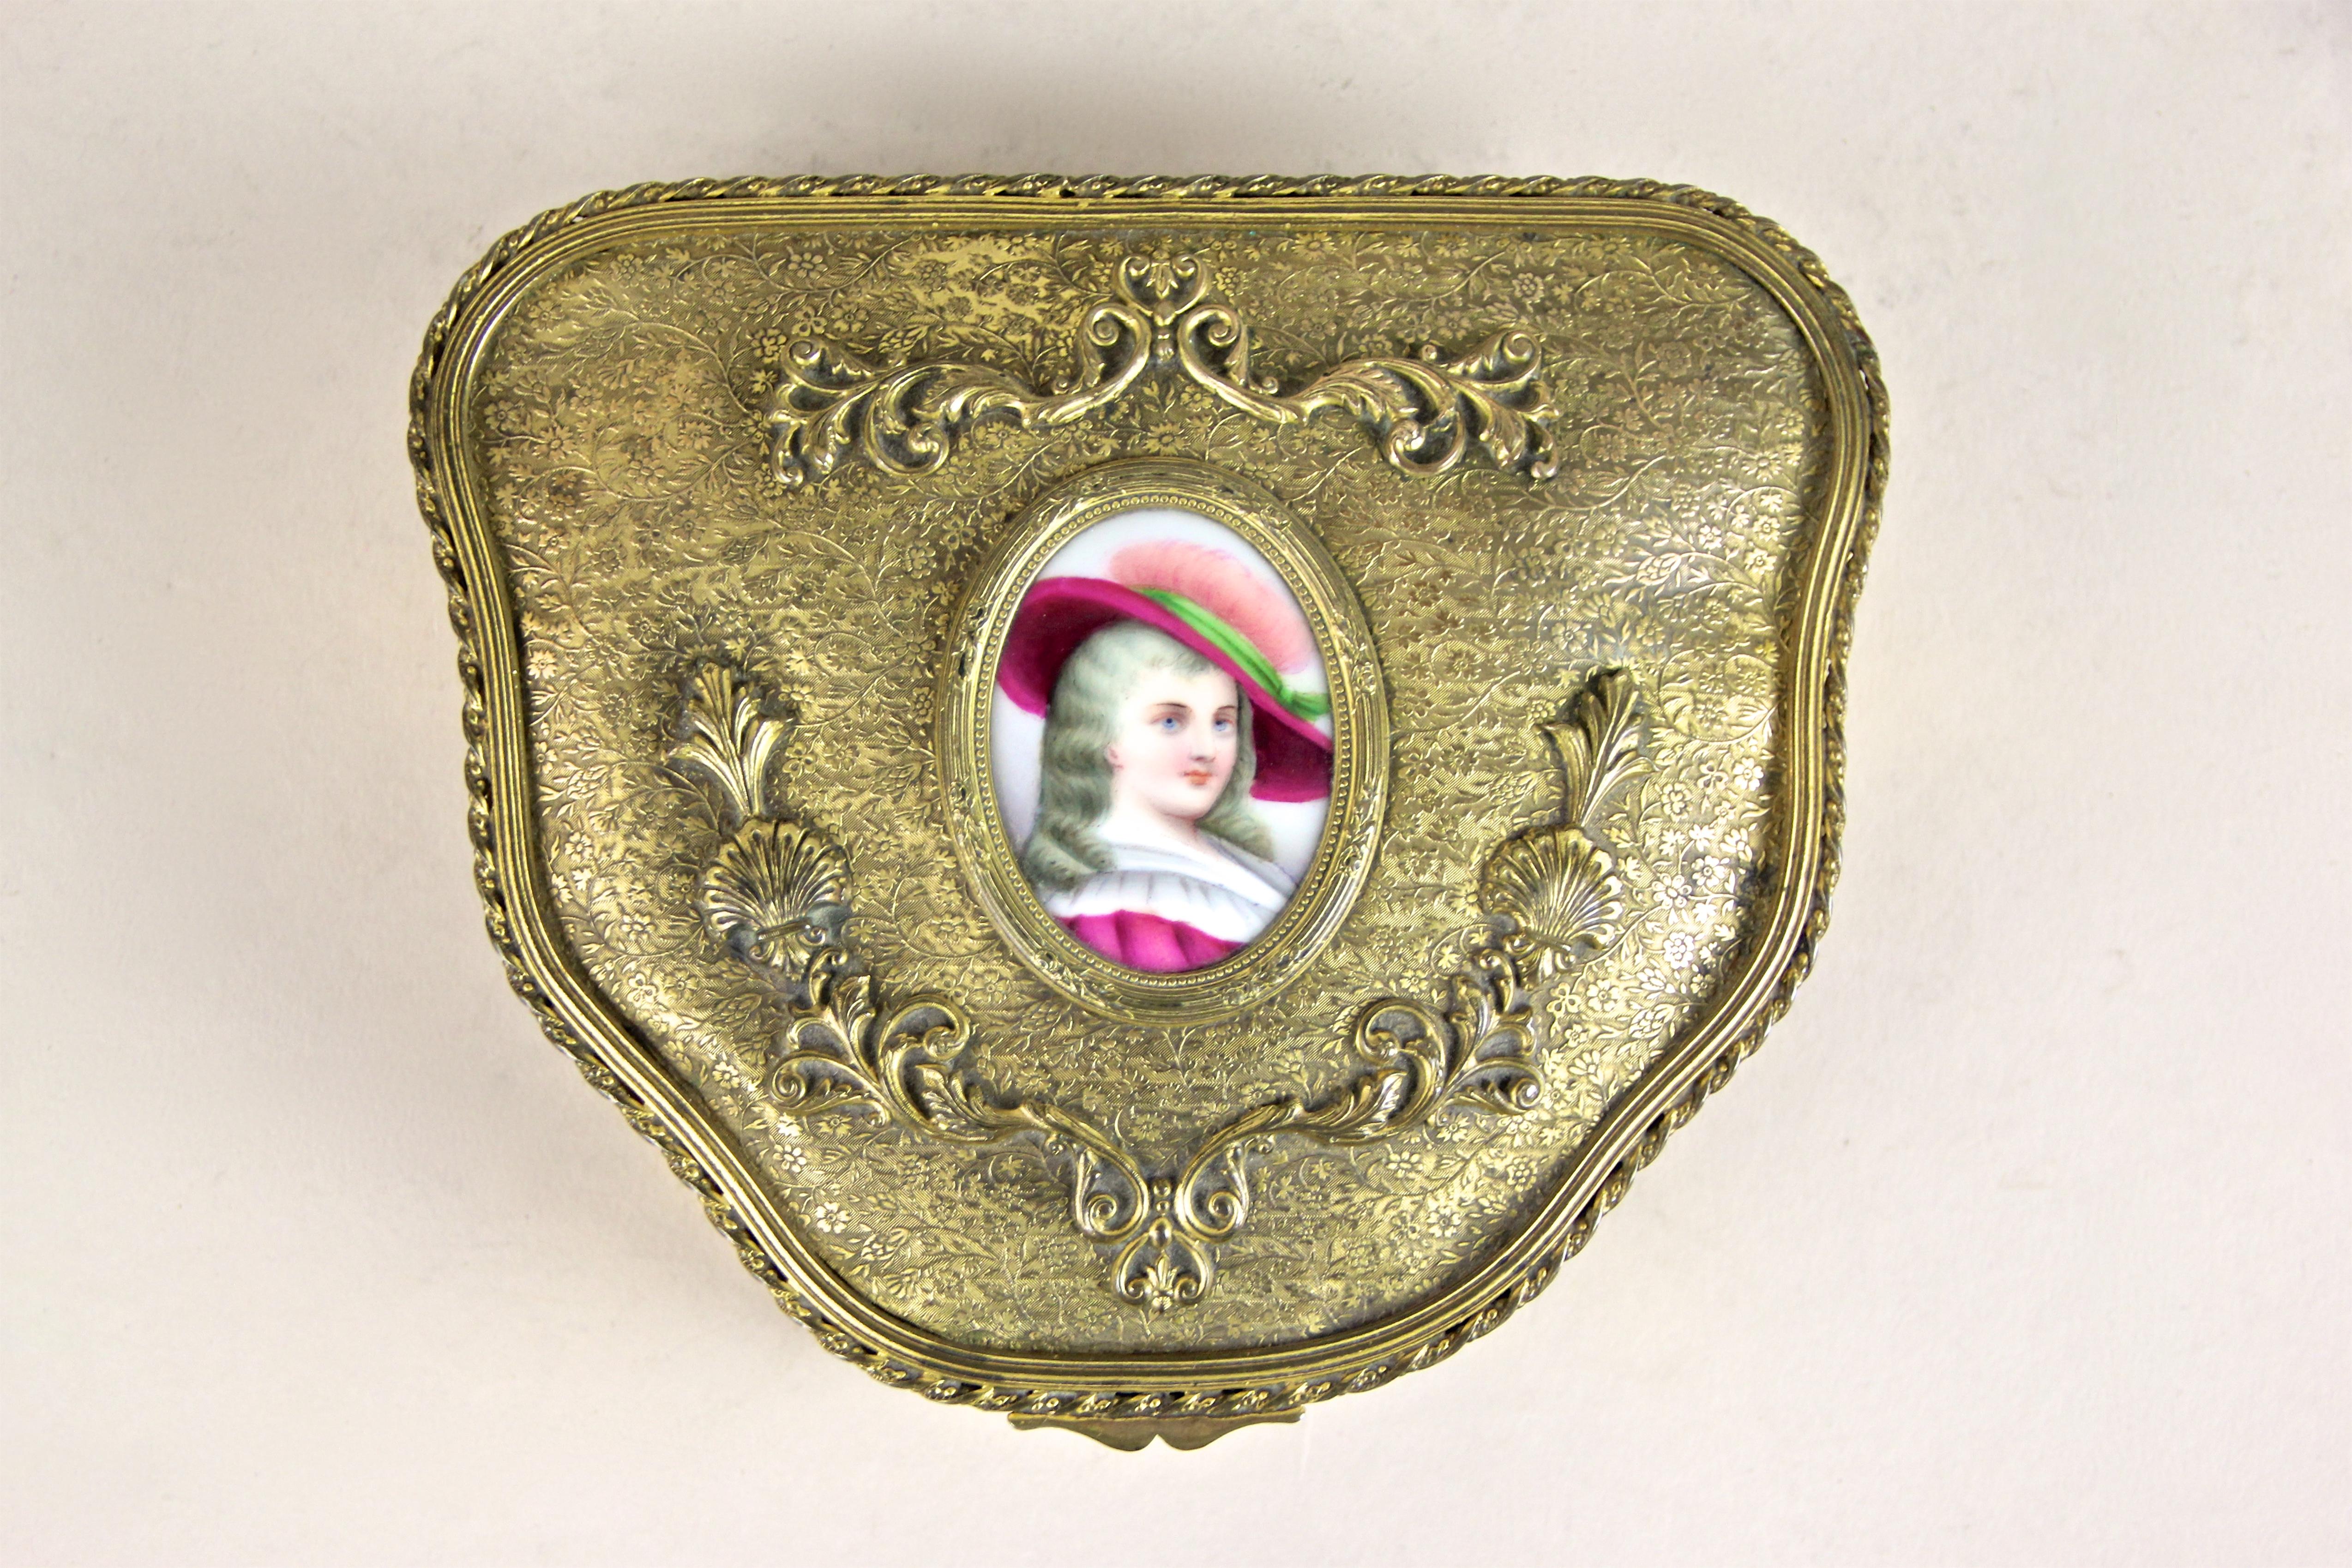 Unique firegilt brass jewelry box with porcelain picture from Austria, circa 1860. The artfully made box from the mid-19th century impresses with an amazingly detailed surface adorned by beautiful flowers or floral elements. The center of the hinged